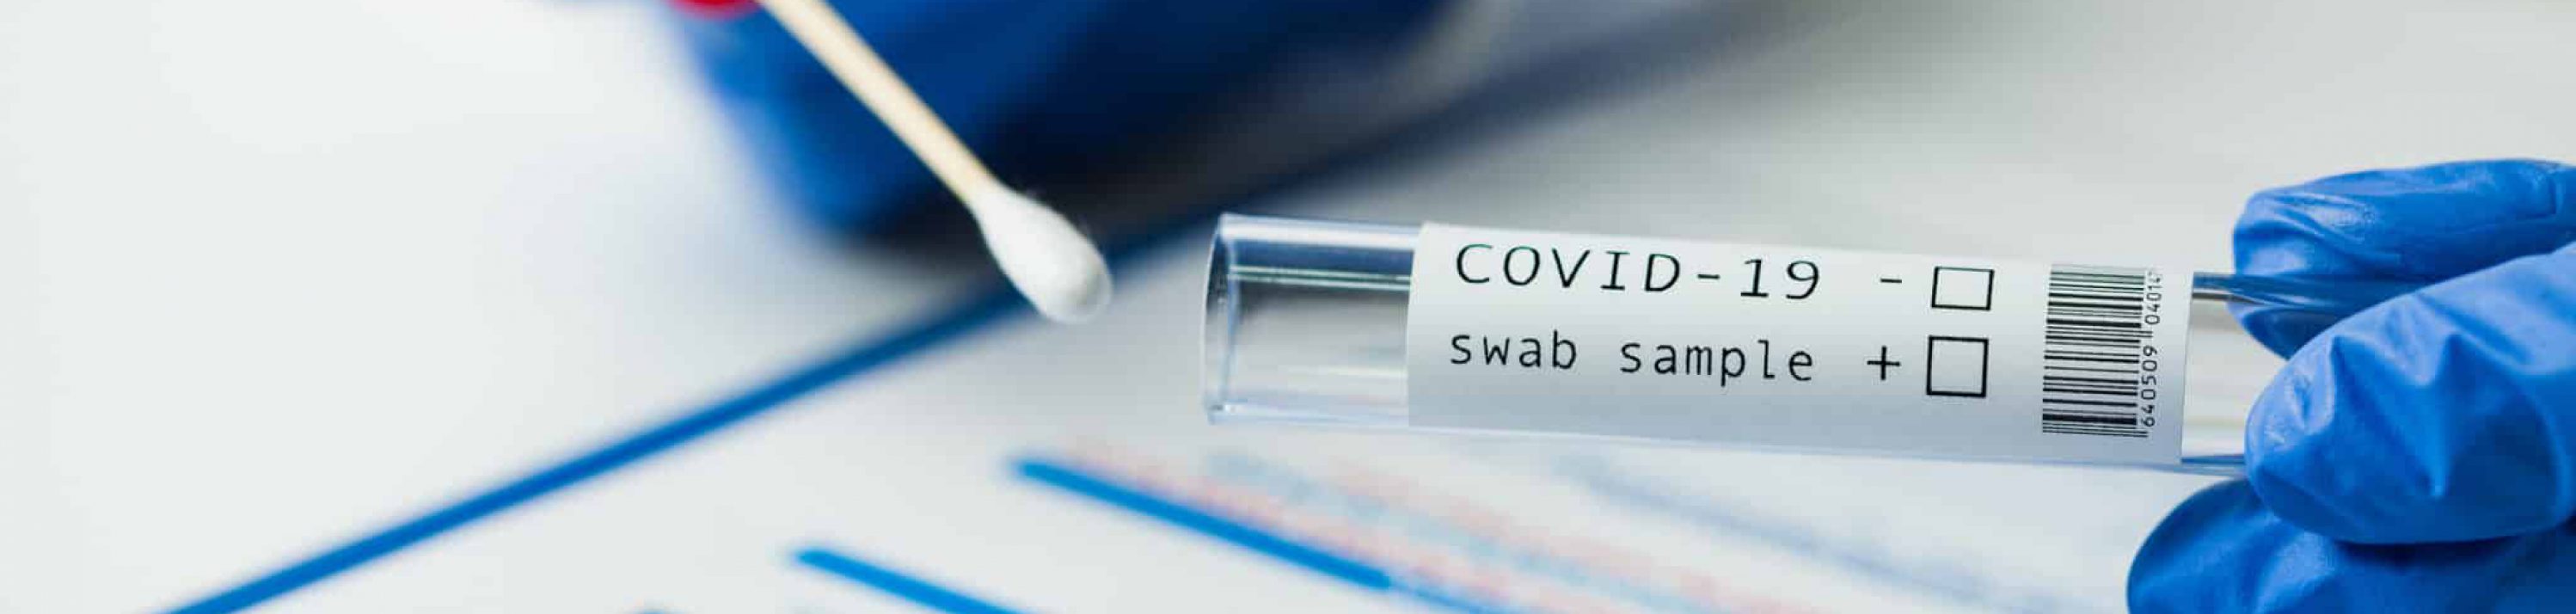 Medical worker holding Coronavirus COVID-19 NP OP swab sample test kit, nasal collection equipment, CDC submitting form, reverse transcription RT-PCR DNA molecular nucleic acid diagnostic procedure